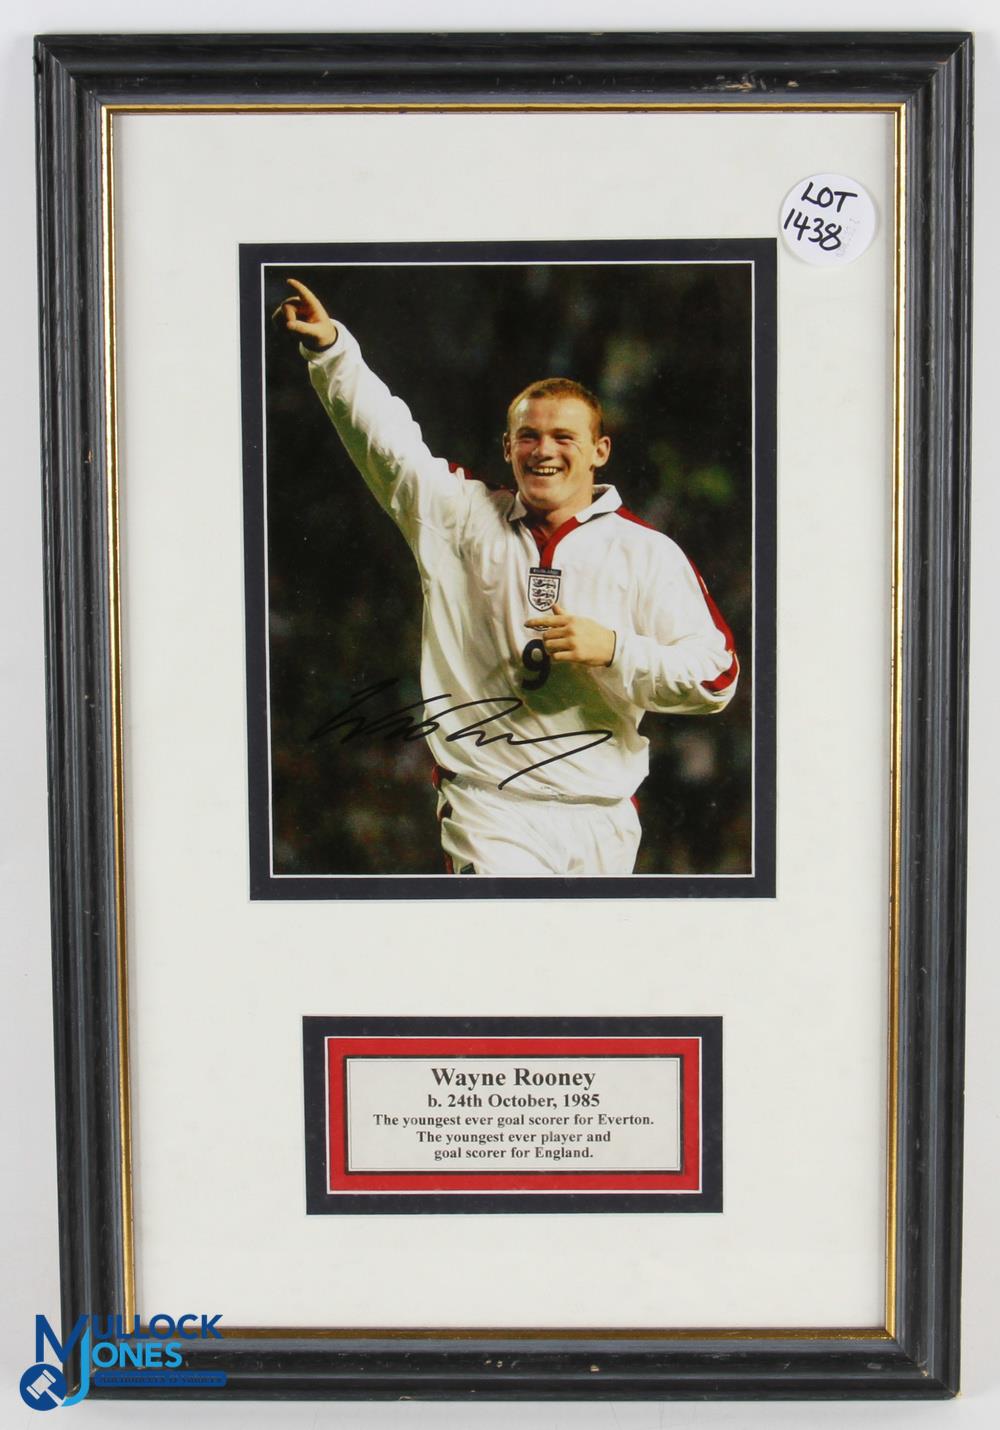 1985 Wayne Rooney England Youngest Goal Scorer Sign Photograph, well mounted with a strong signature